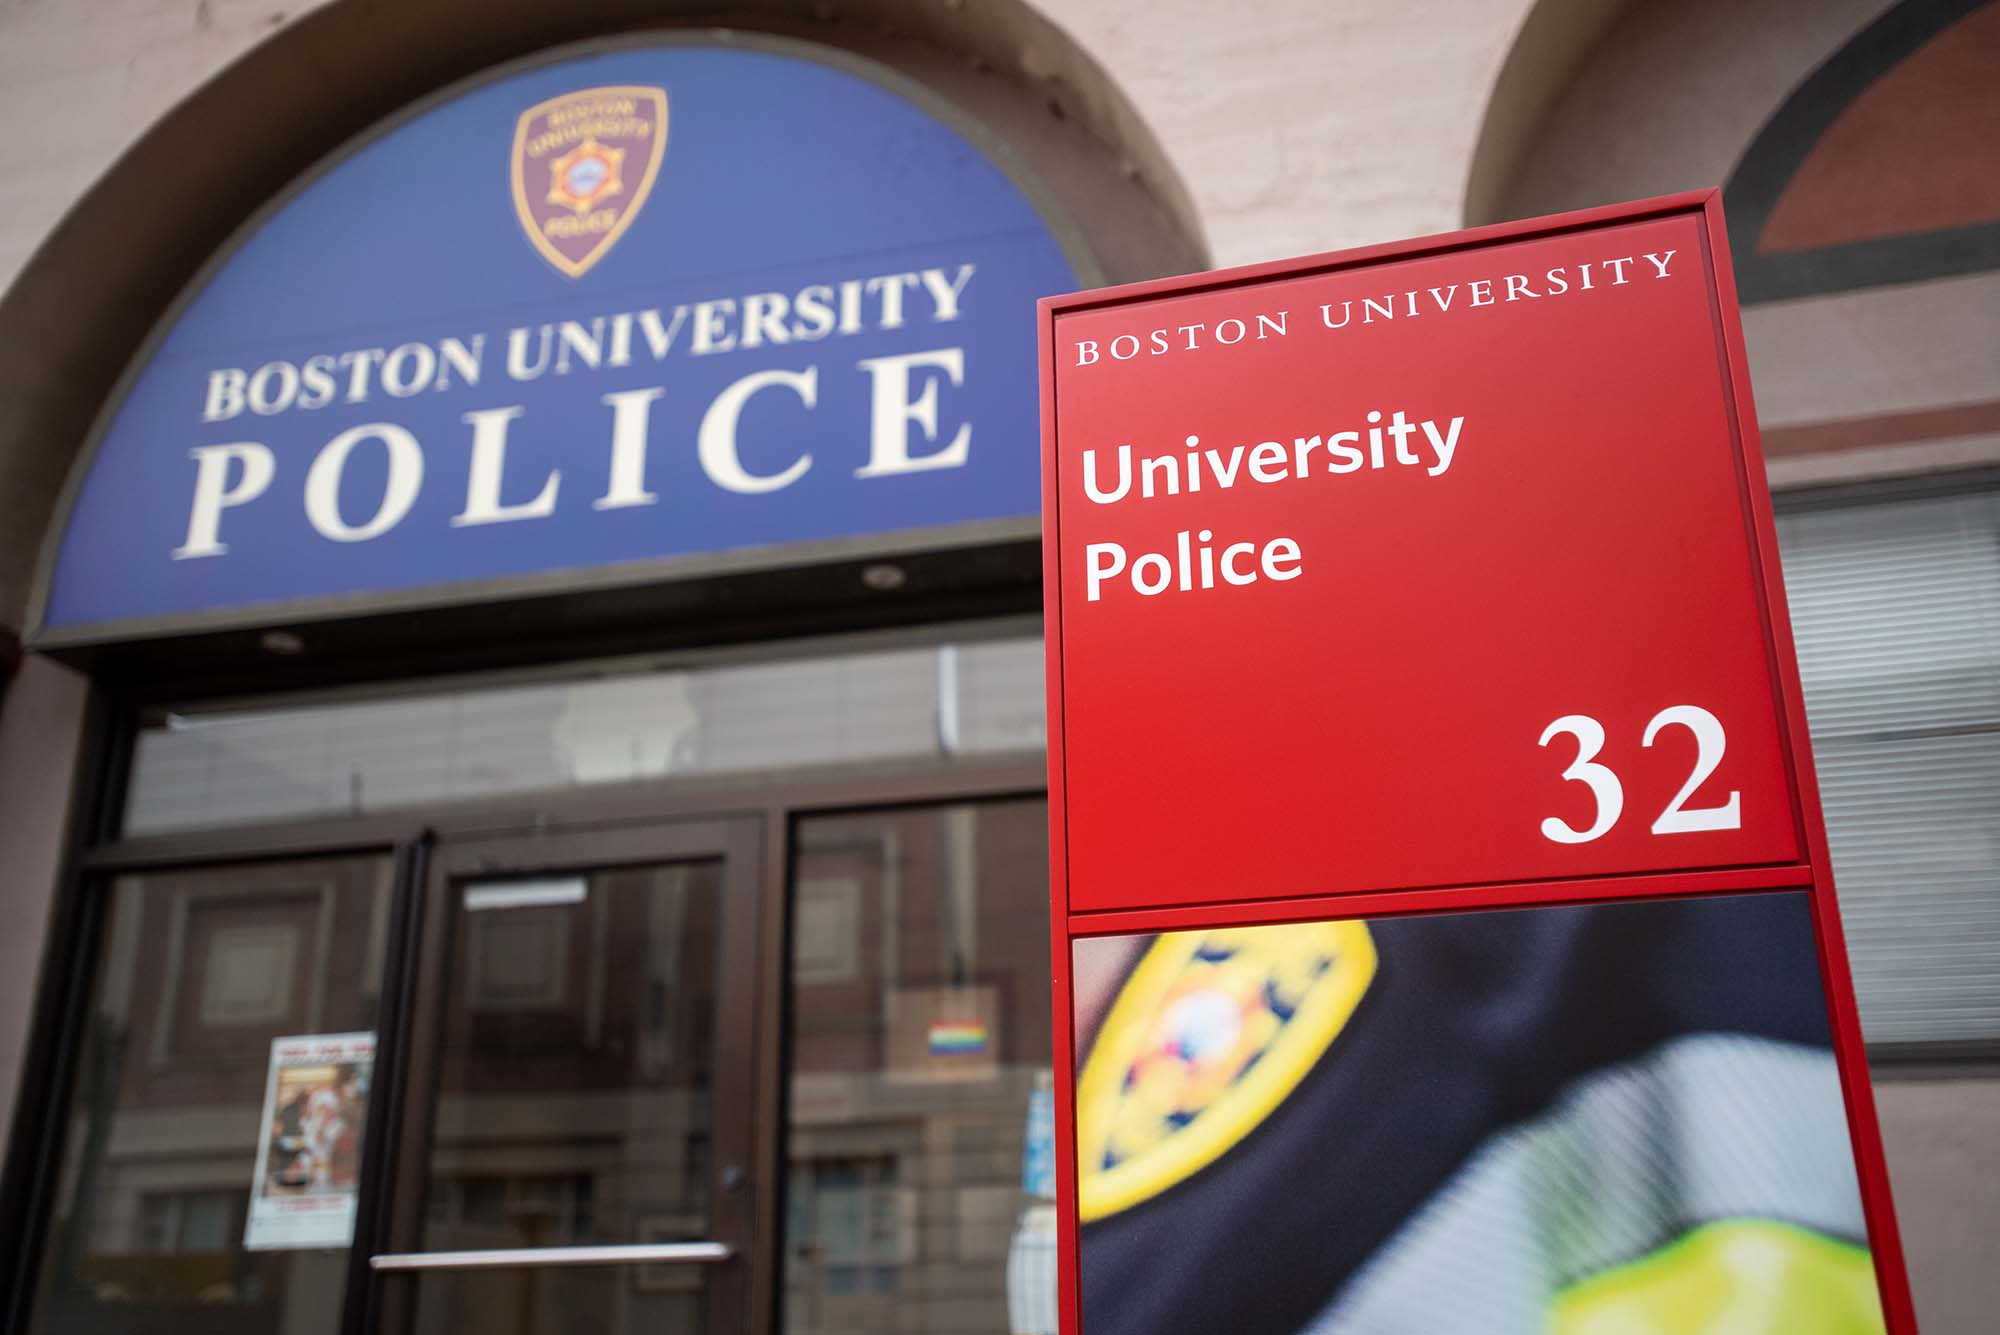 View of the entrance to the Boston University Police Department station.